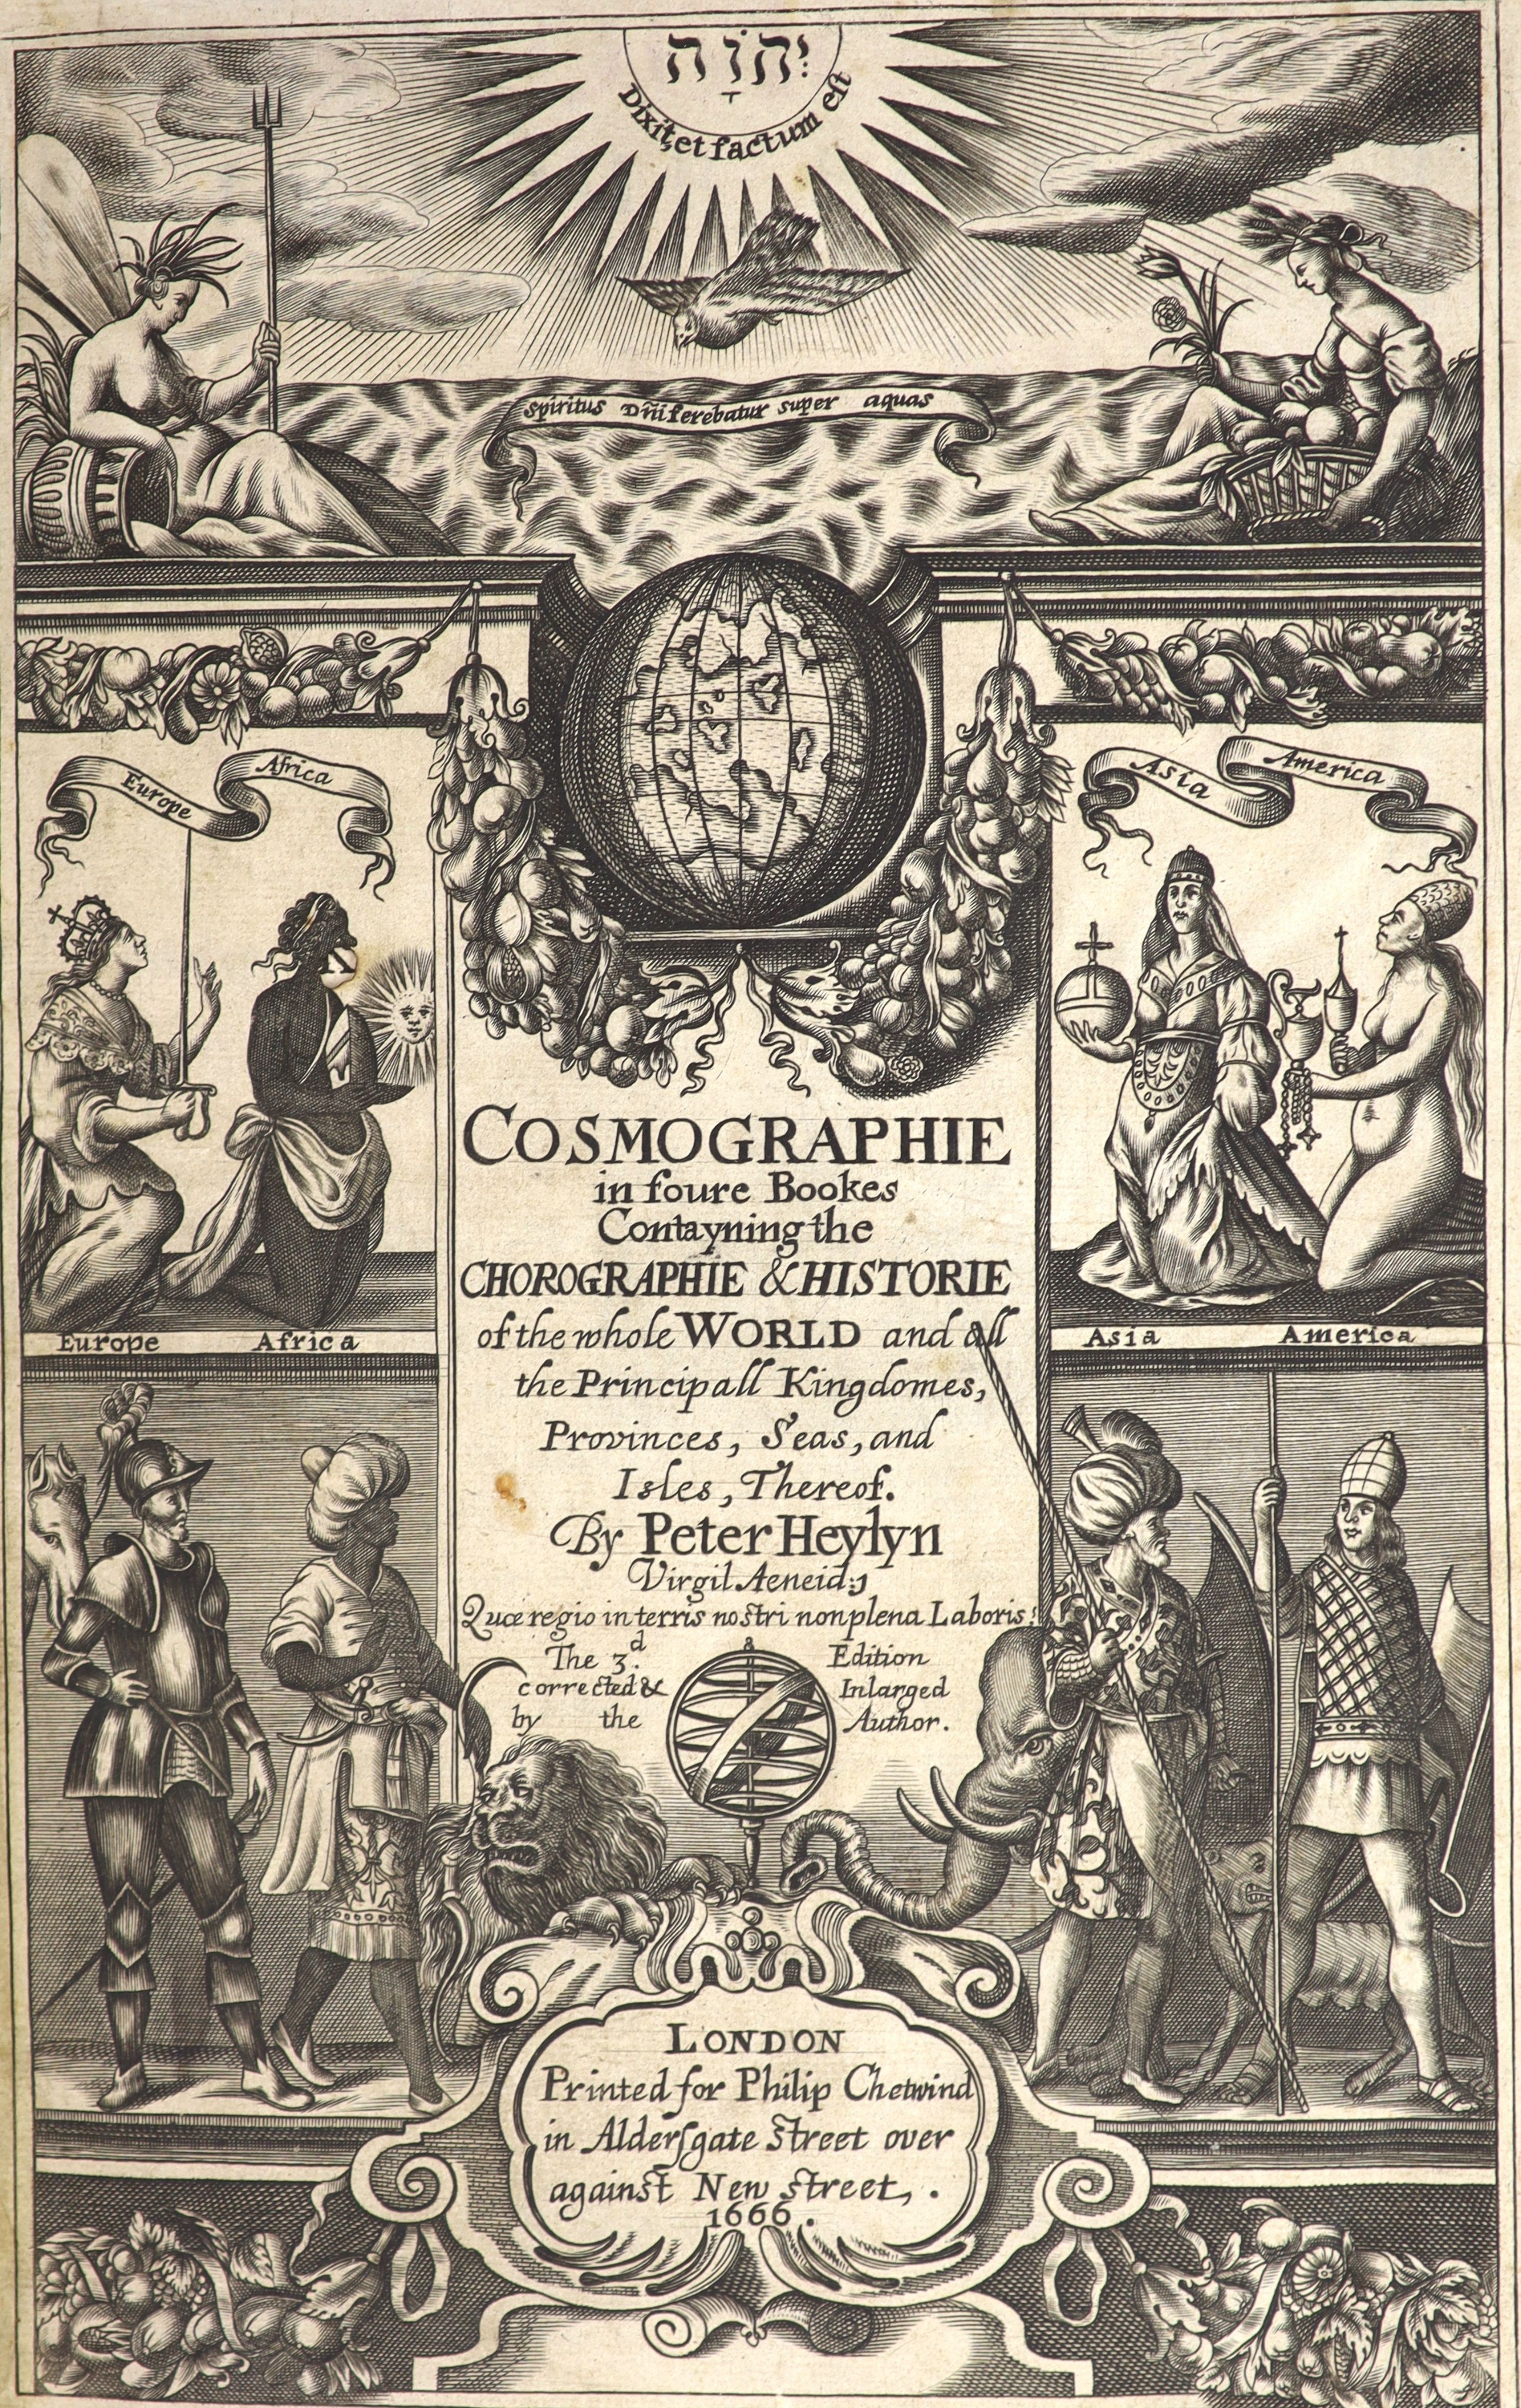 Heylyn, Peter. Cosmographie, in Four Books. Containing the Chorographie and Historie of the Whole Word, and all the principal kingdoms, provinces, seas, and isles thereof ... revised and corrected by the author ...